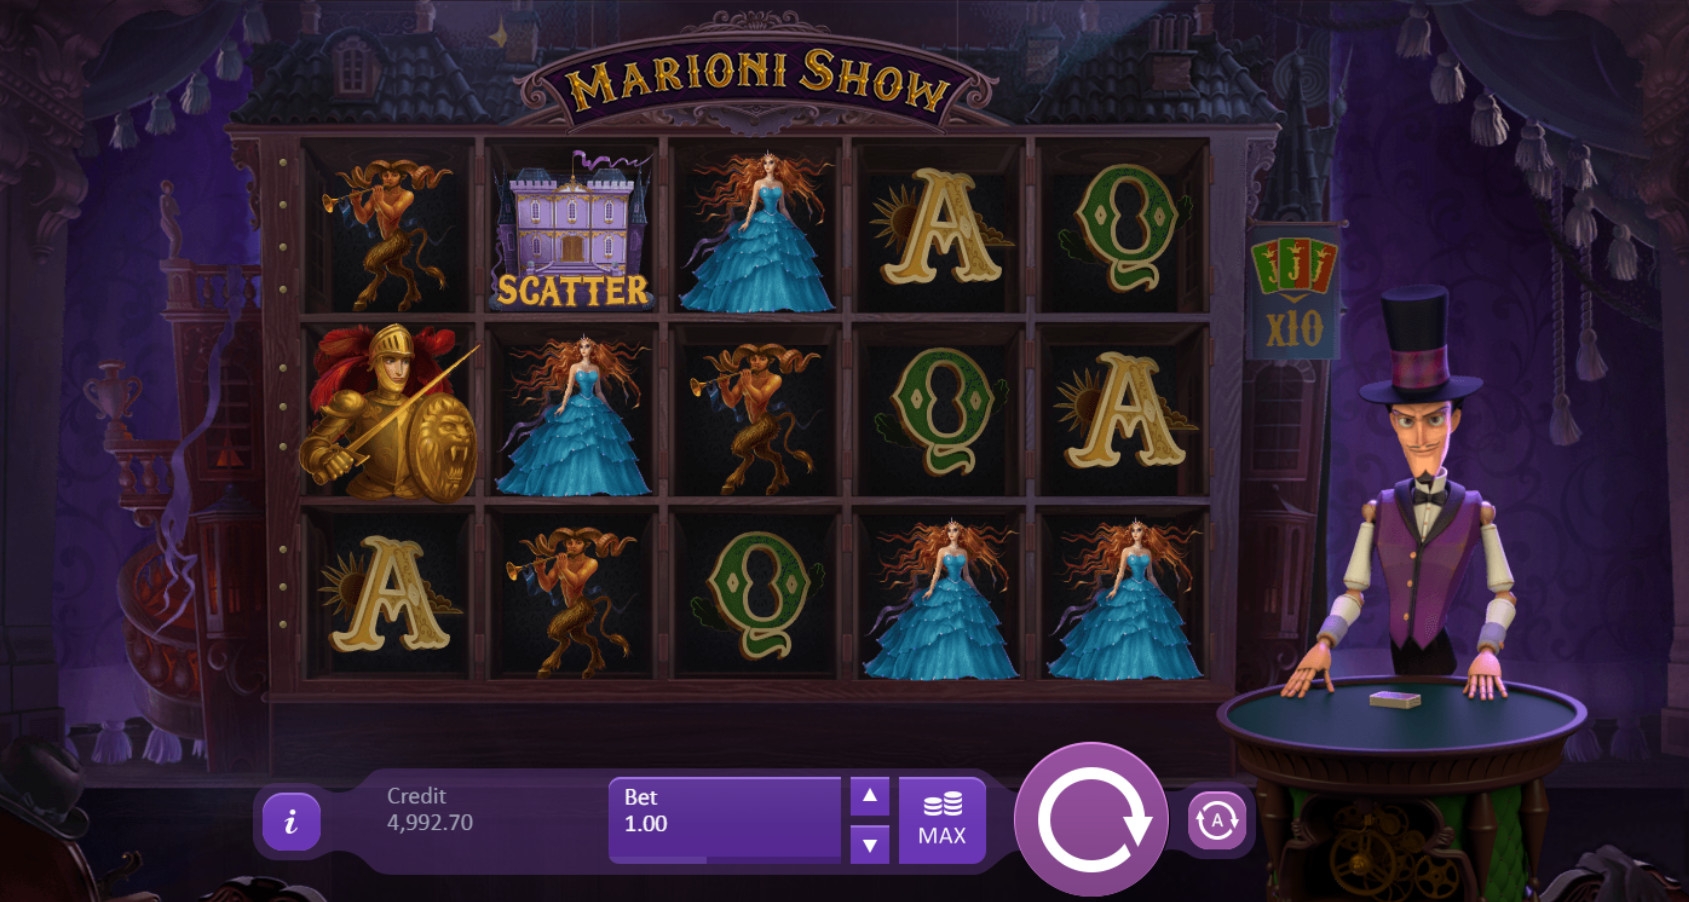 Marioni Show (Marioni Show) from category Slots